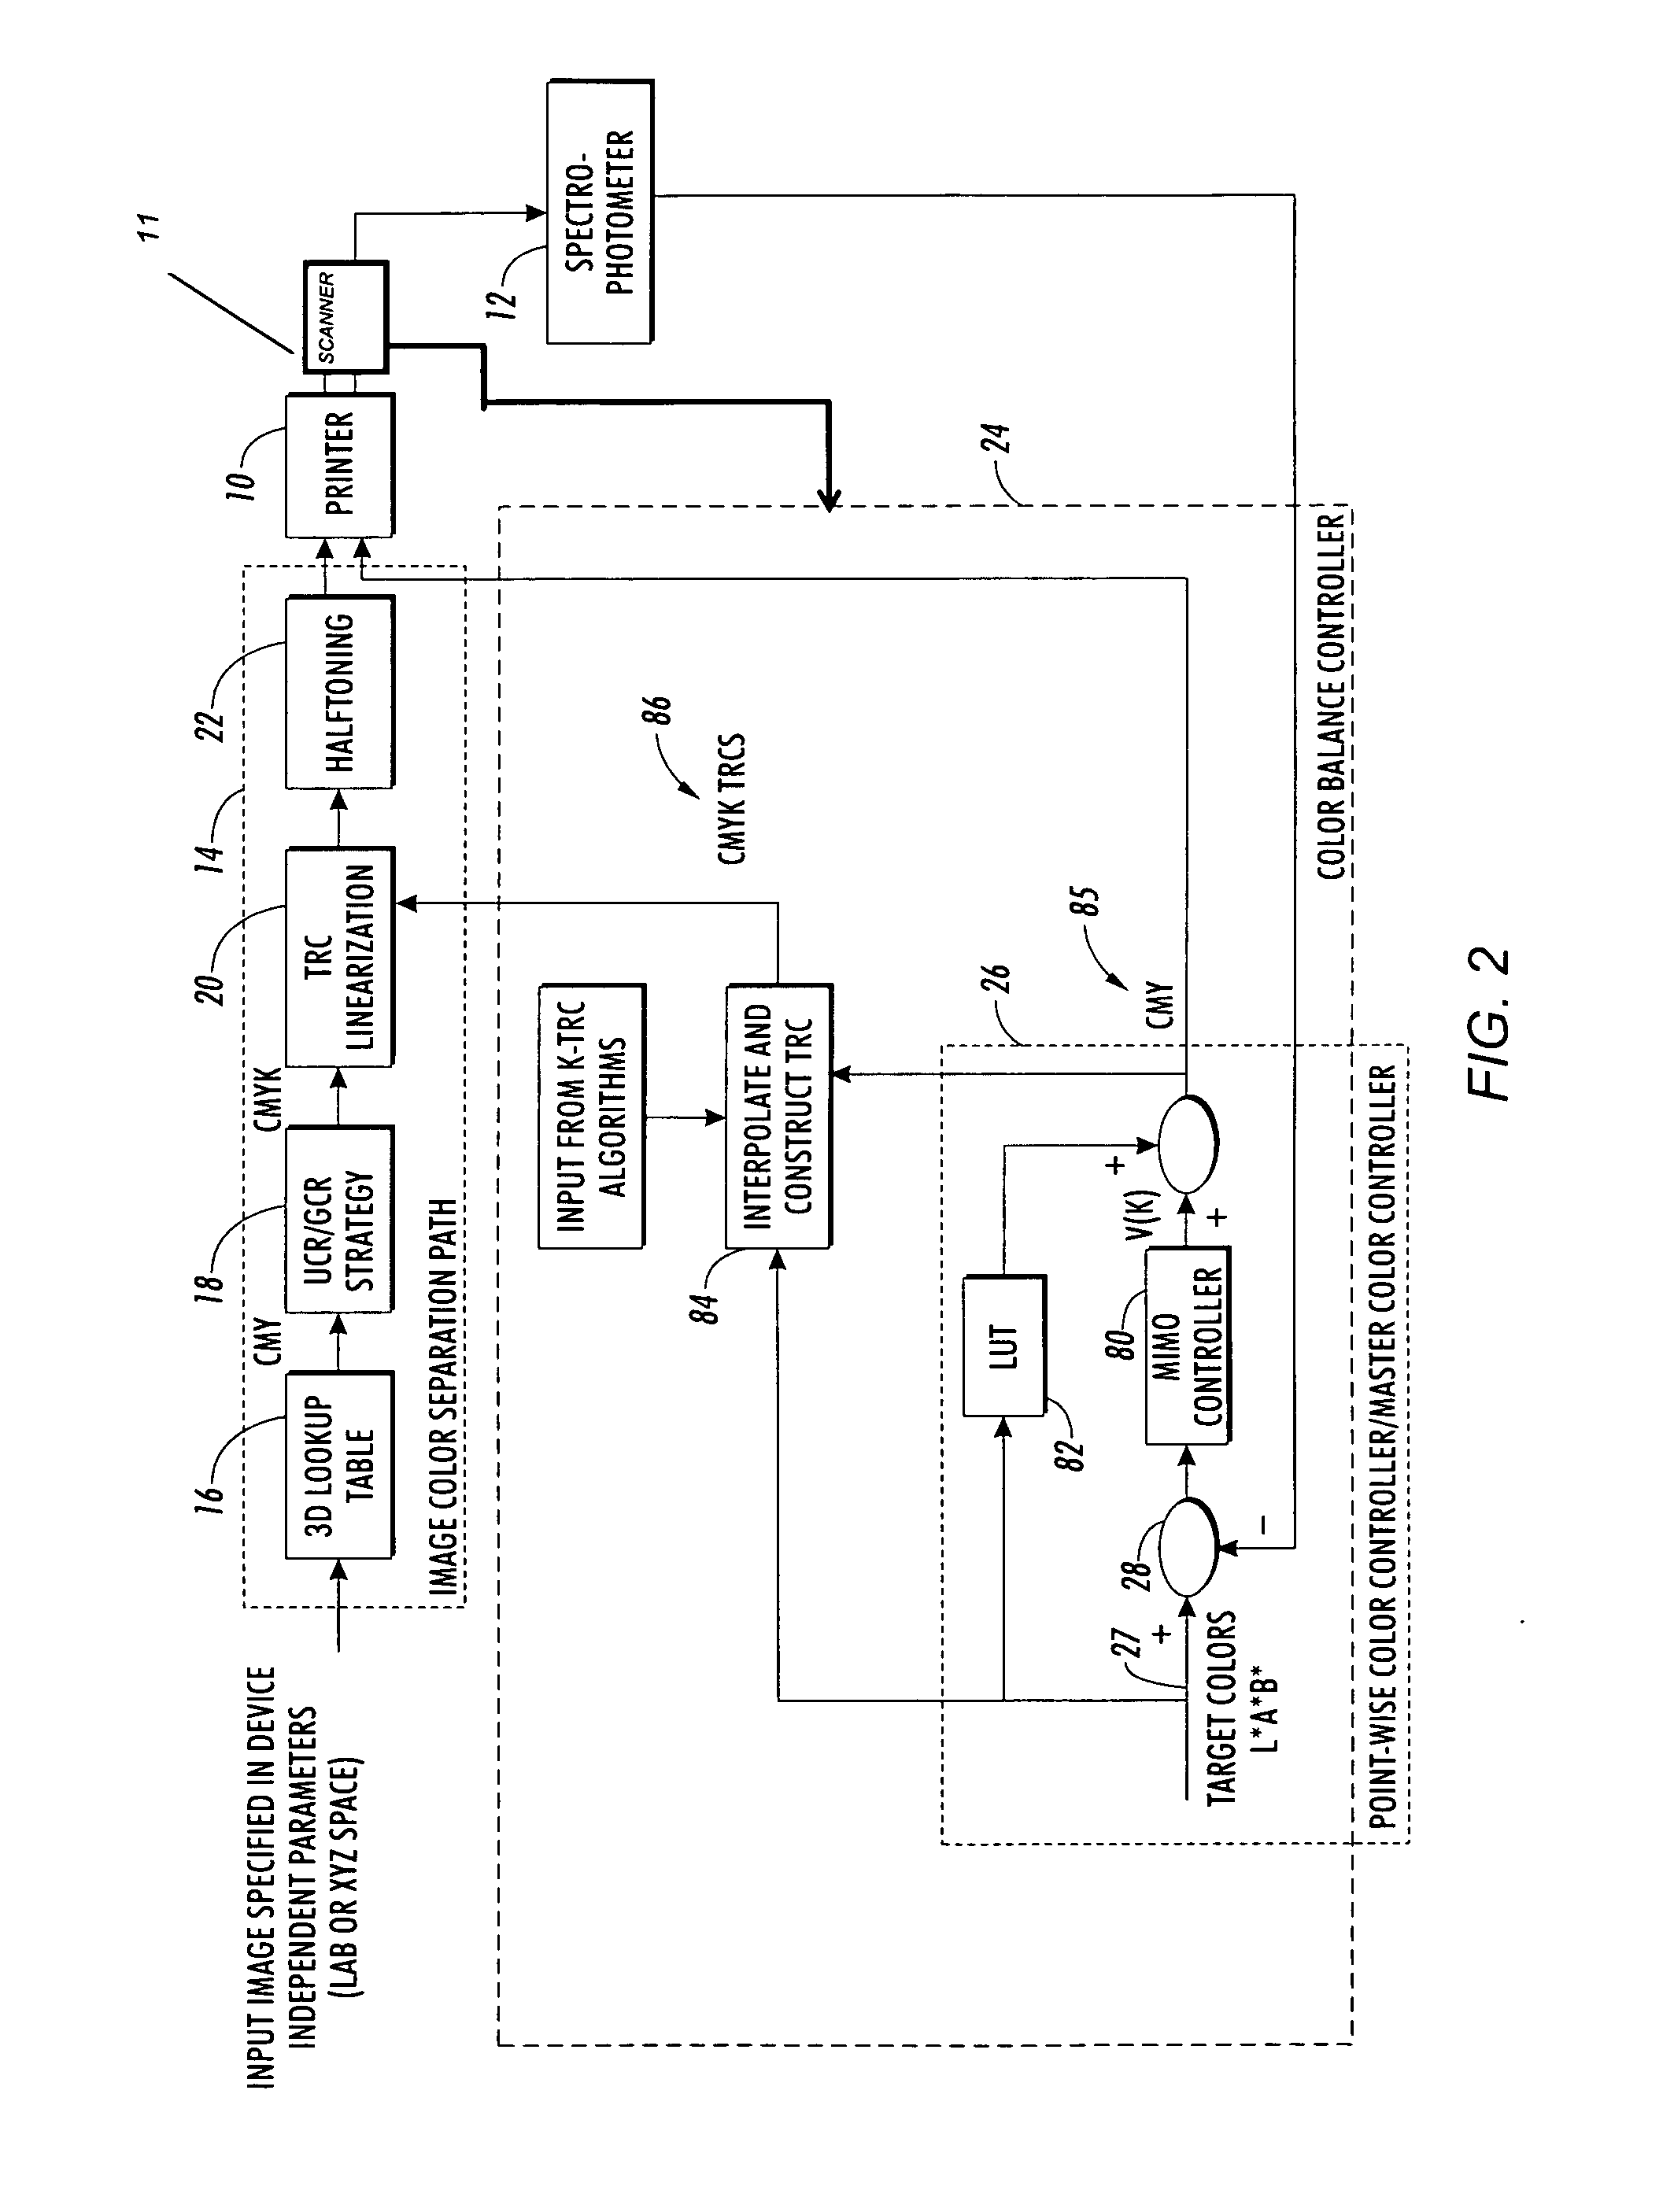 System and method for spatial gray balance calibration using hybrid sensing systems